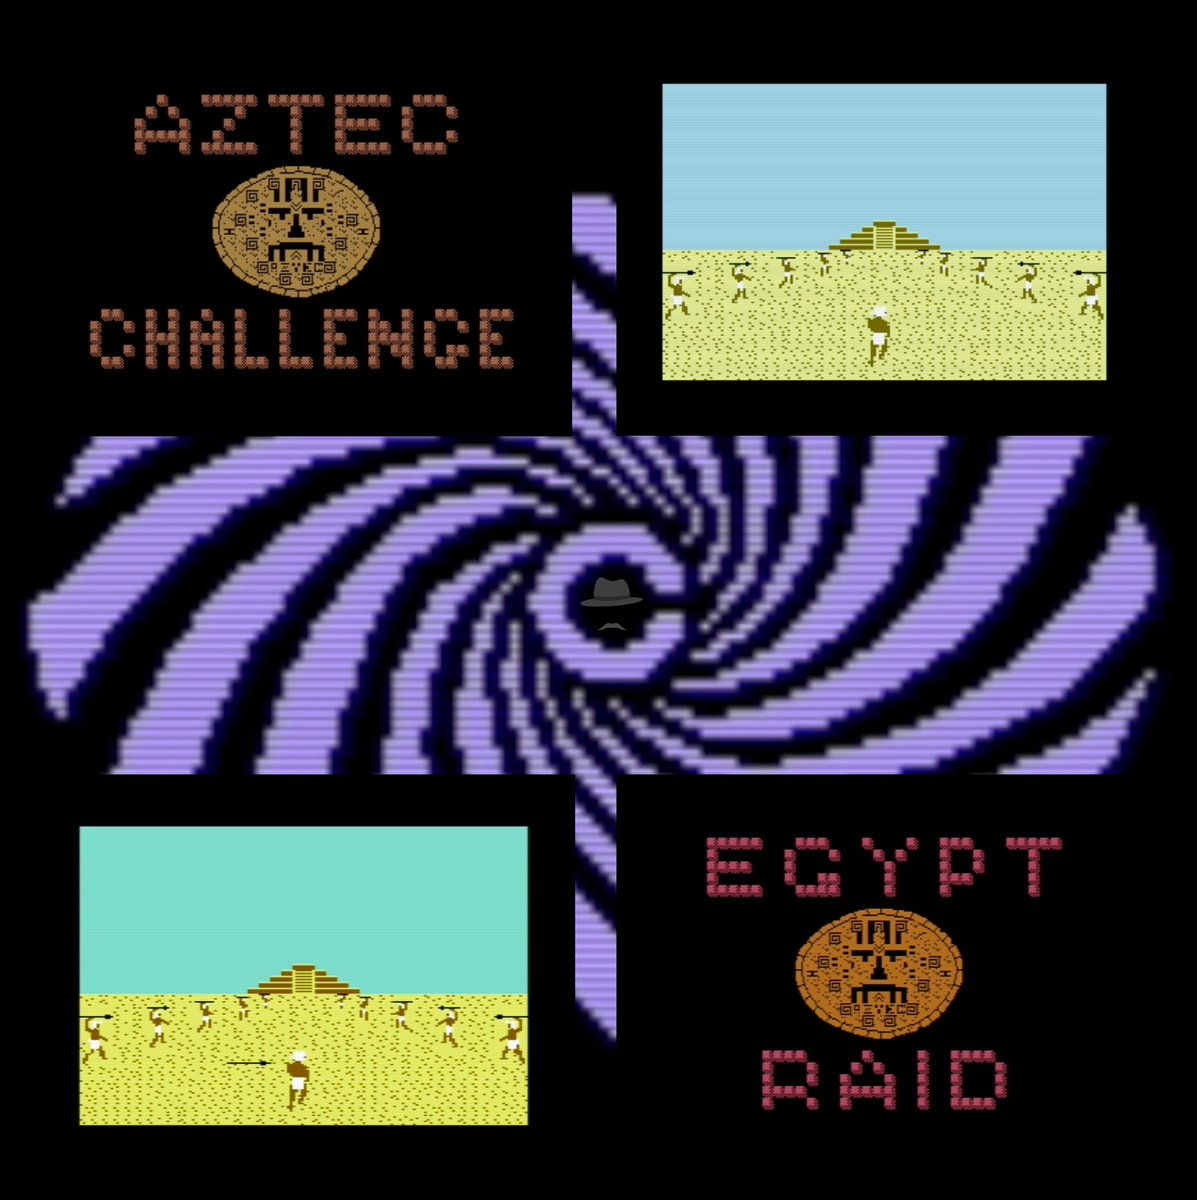 #AztecChallenge, developed by Cosmi, was also known under a different name: #EgyptRaid. Always thought that was weird. You are not in Egypt and you're only trying to survive... #Retro #RetroComputing #RetroComputer #RetroGaming #RetroGame #Commodore #Commodore64 #C64 #Atari